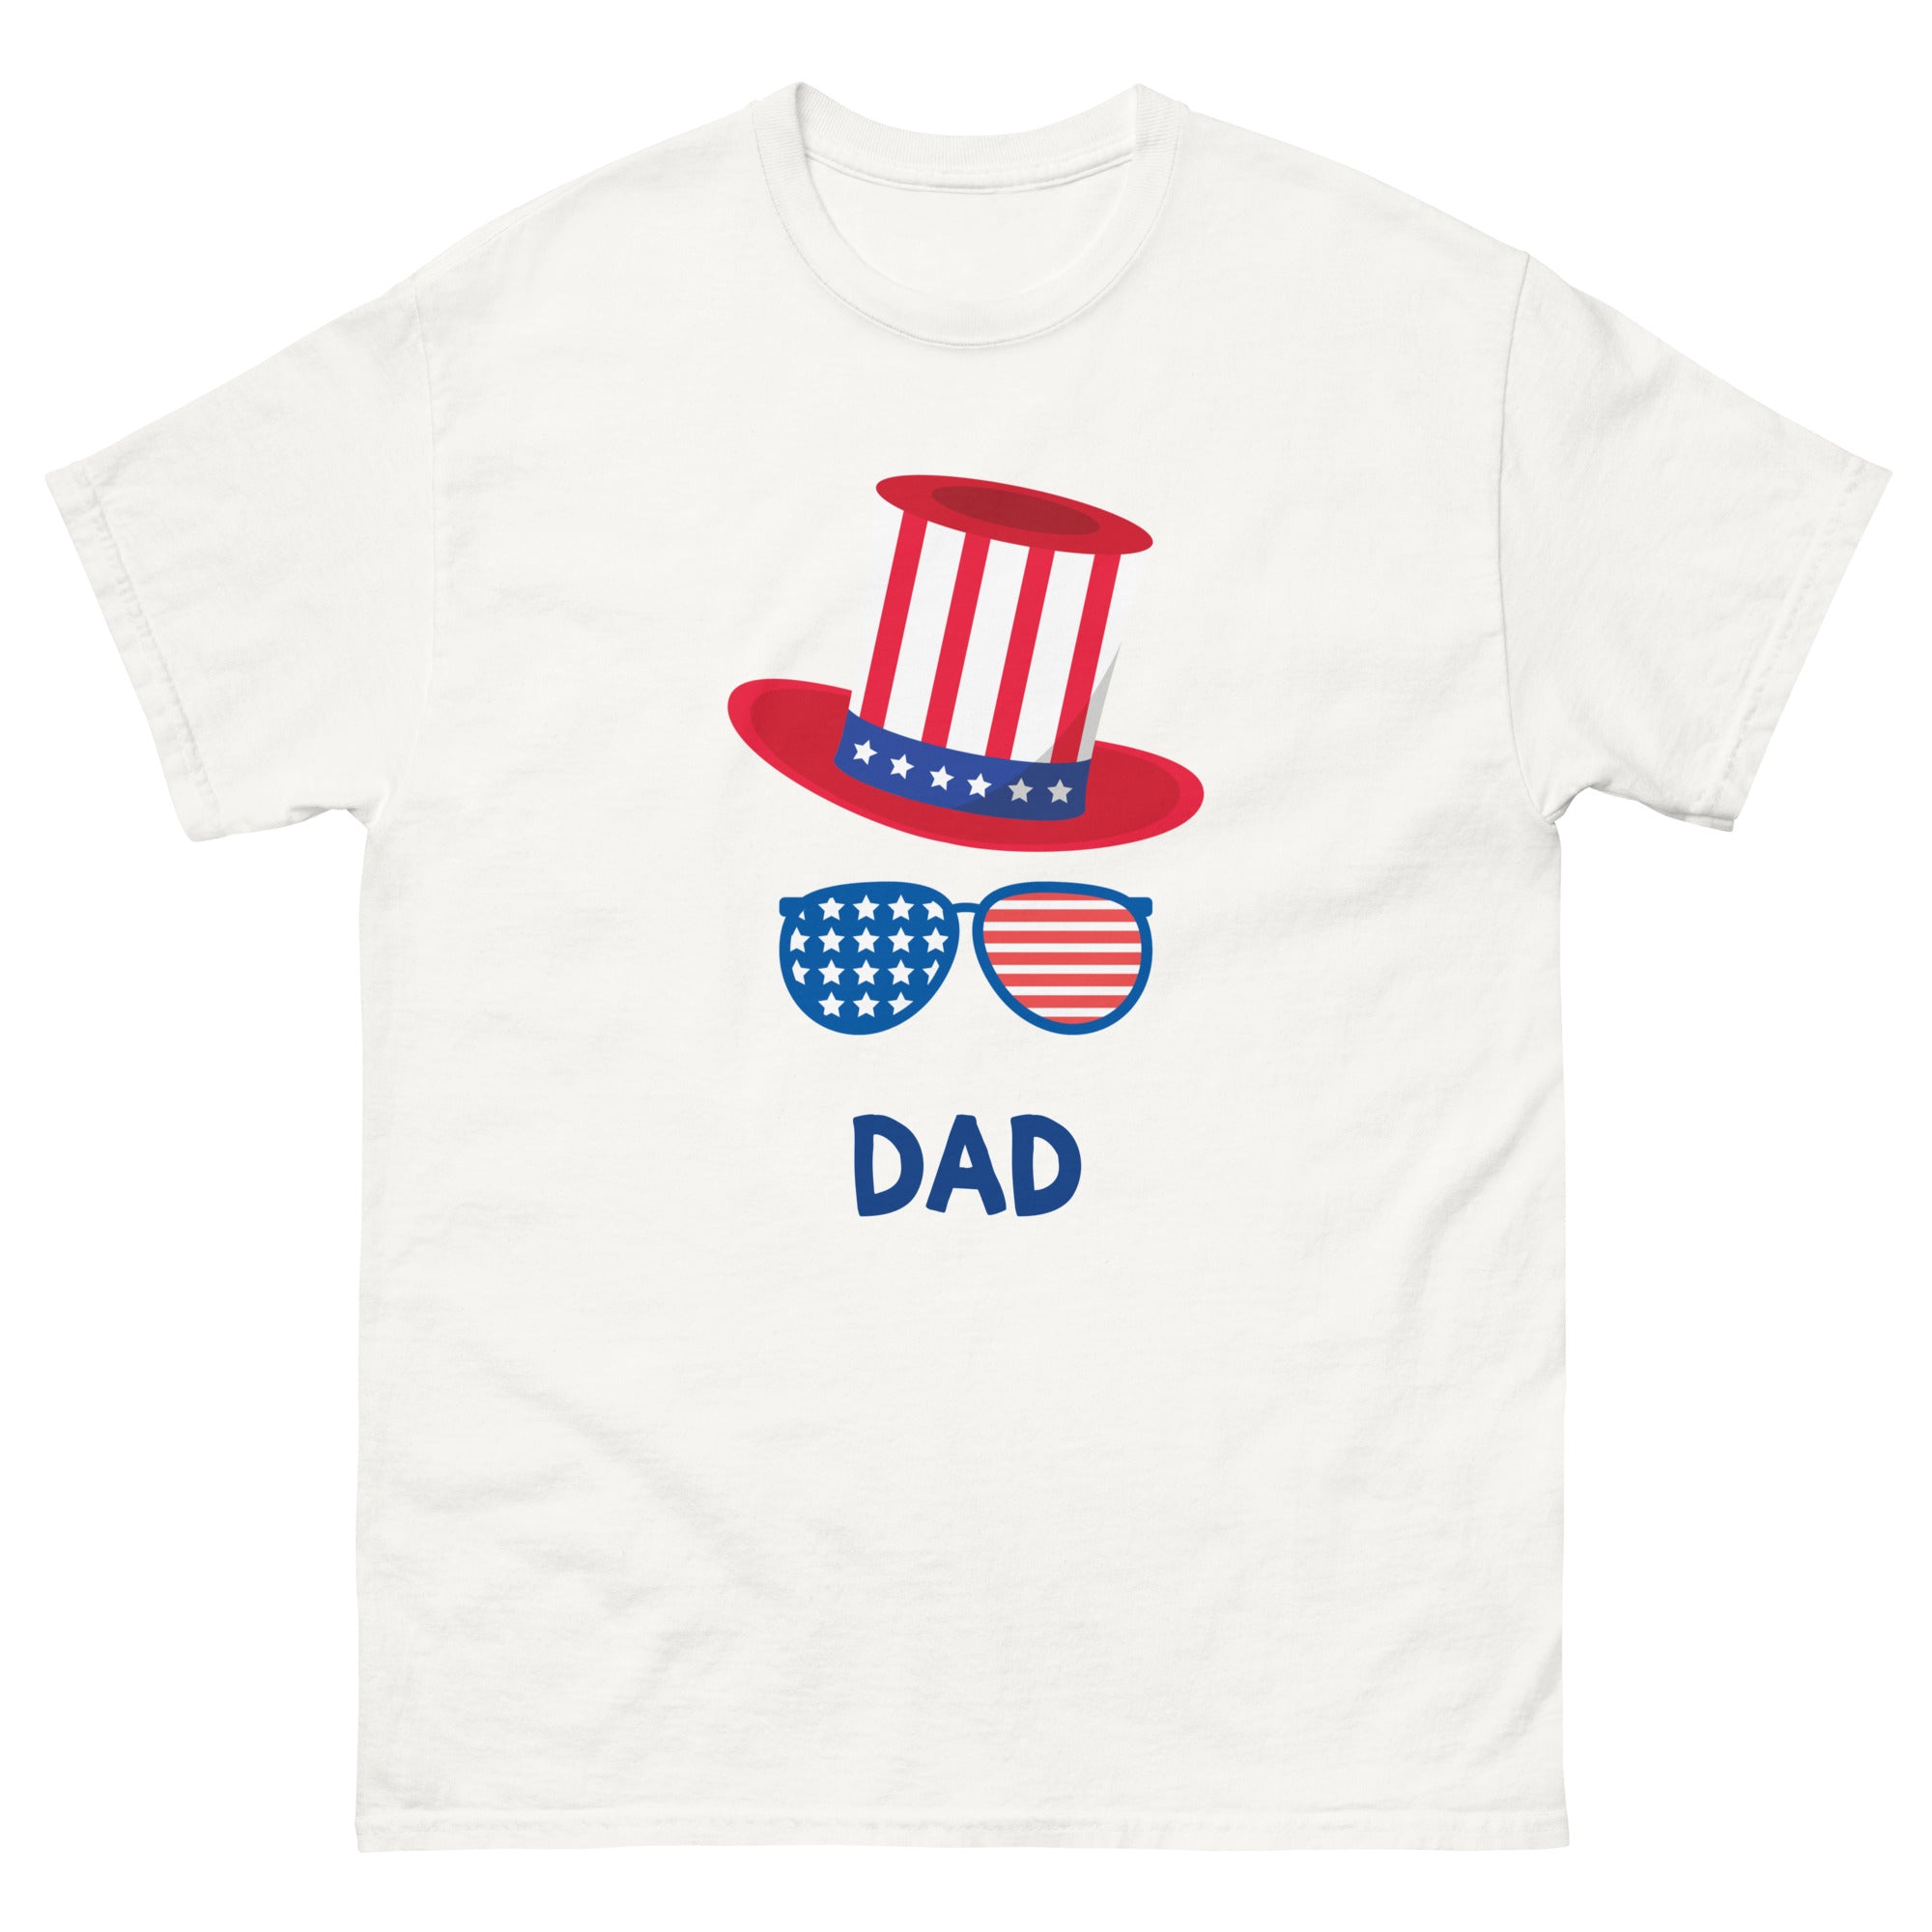 Personalized men's shirt perfect for memorial day or other us holidays celebrations